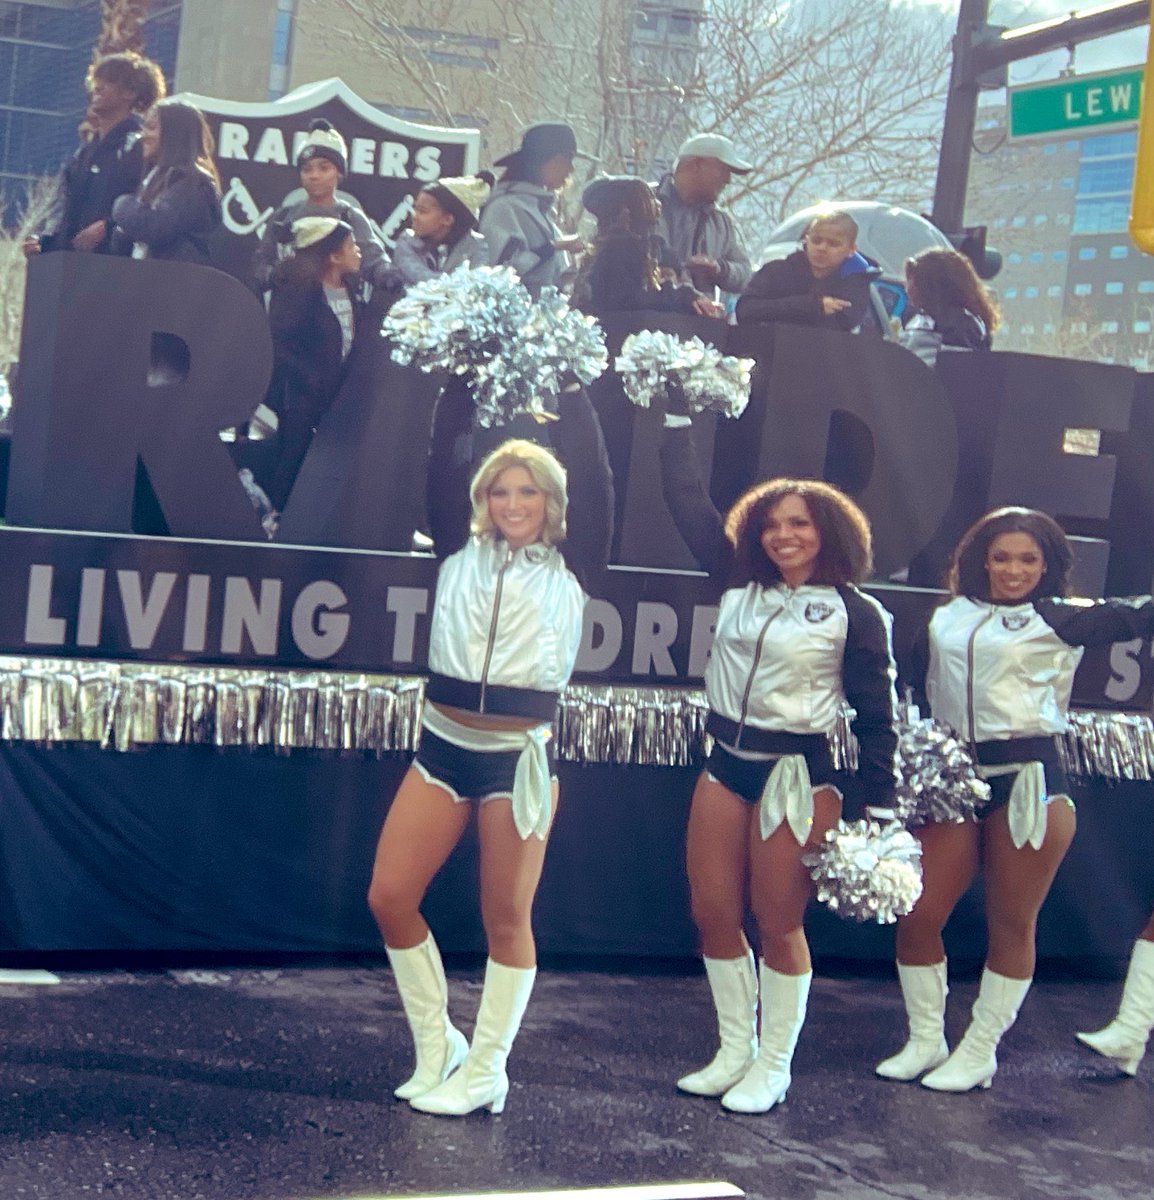 #MLKDay parade… gr8 2 see so many #businesses #schools #communitygroups #electedofficials & #Unions participating 
…  #community #goodchanges @CaesarsPalace @CaesarsEnt @Allegiant @Raiders @DiscoveryLV @LVCCLD @1027VGS @power88vegas @NationalAction @CSNCoyote @CNLV @LasVegasFD